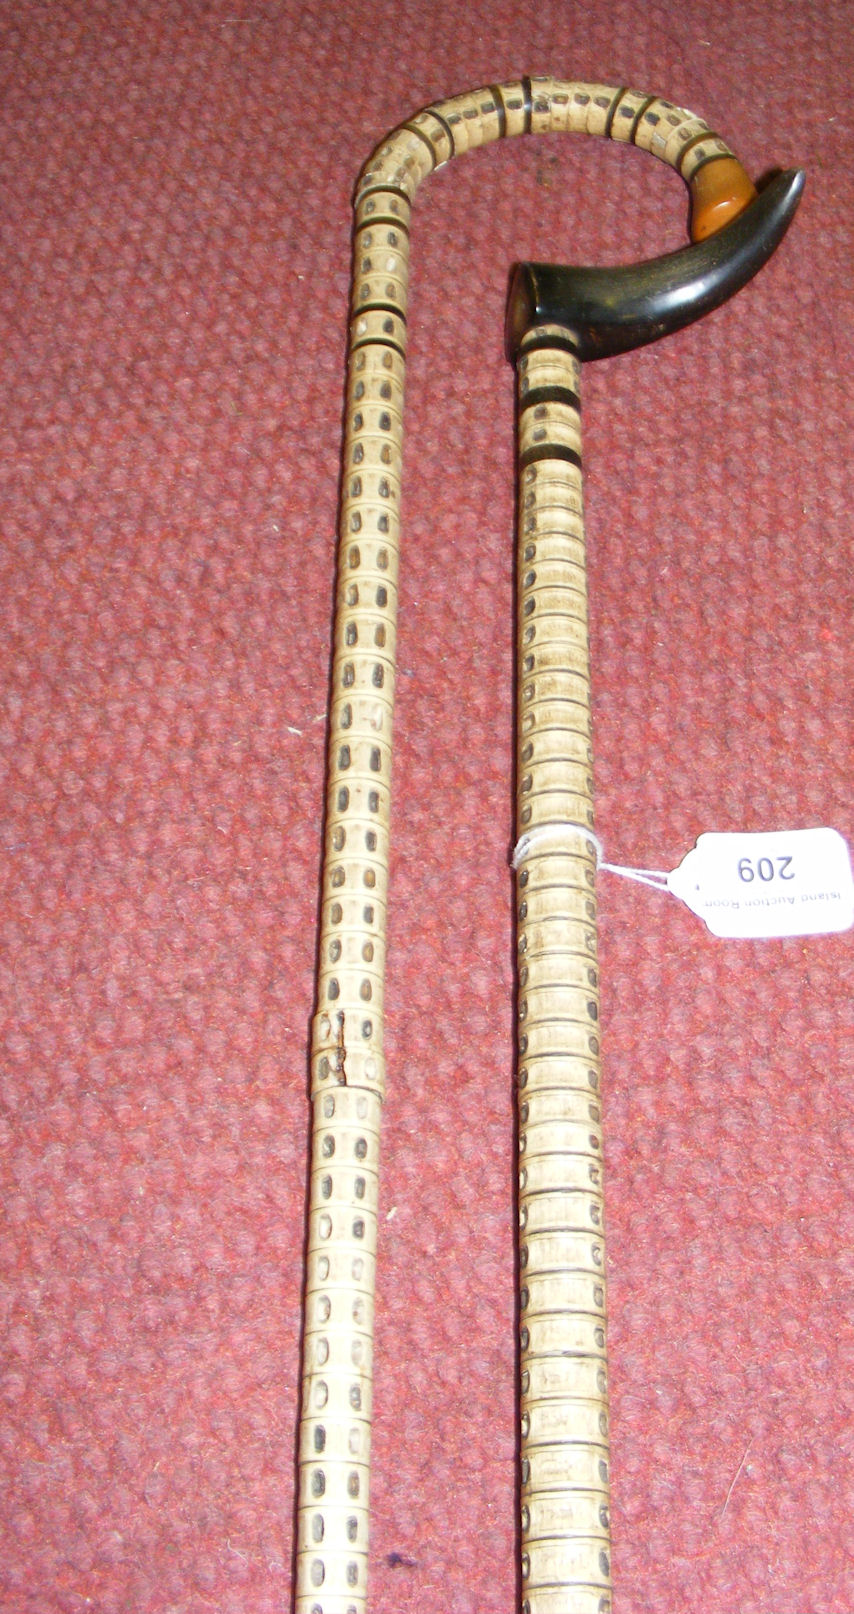 Two walking canes fashioned from shark vertebrae